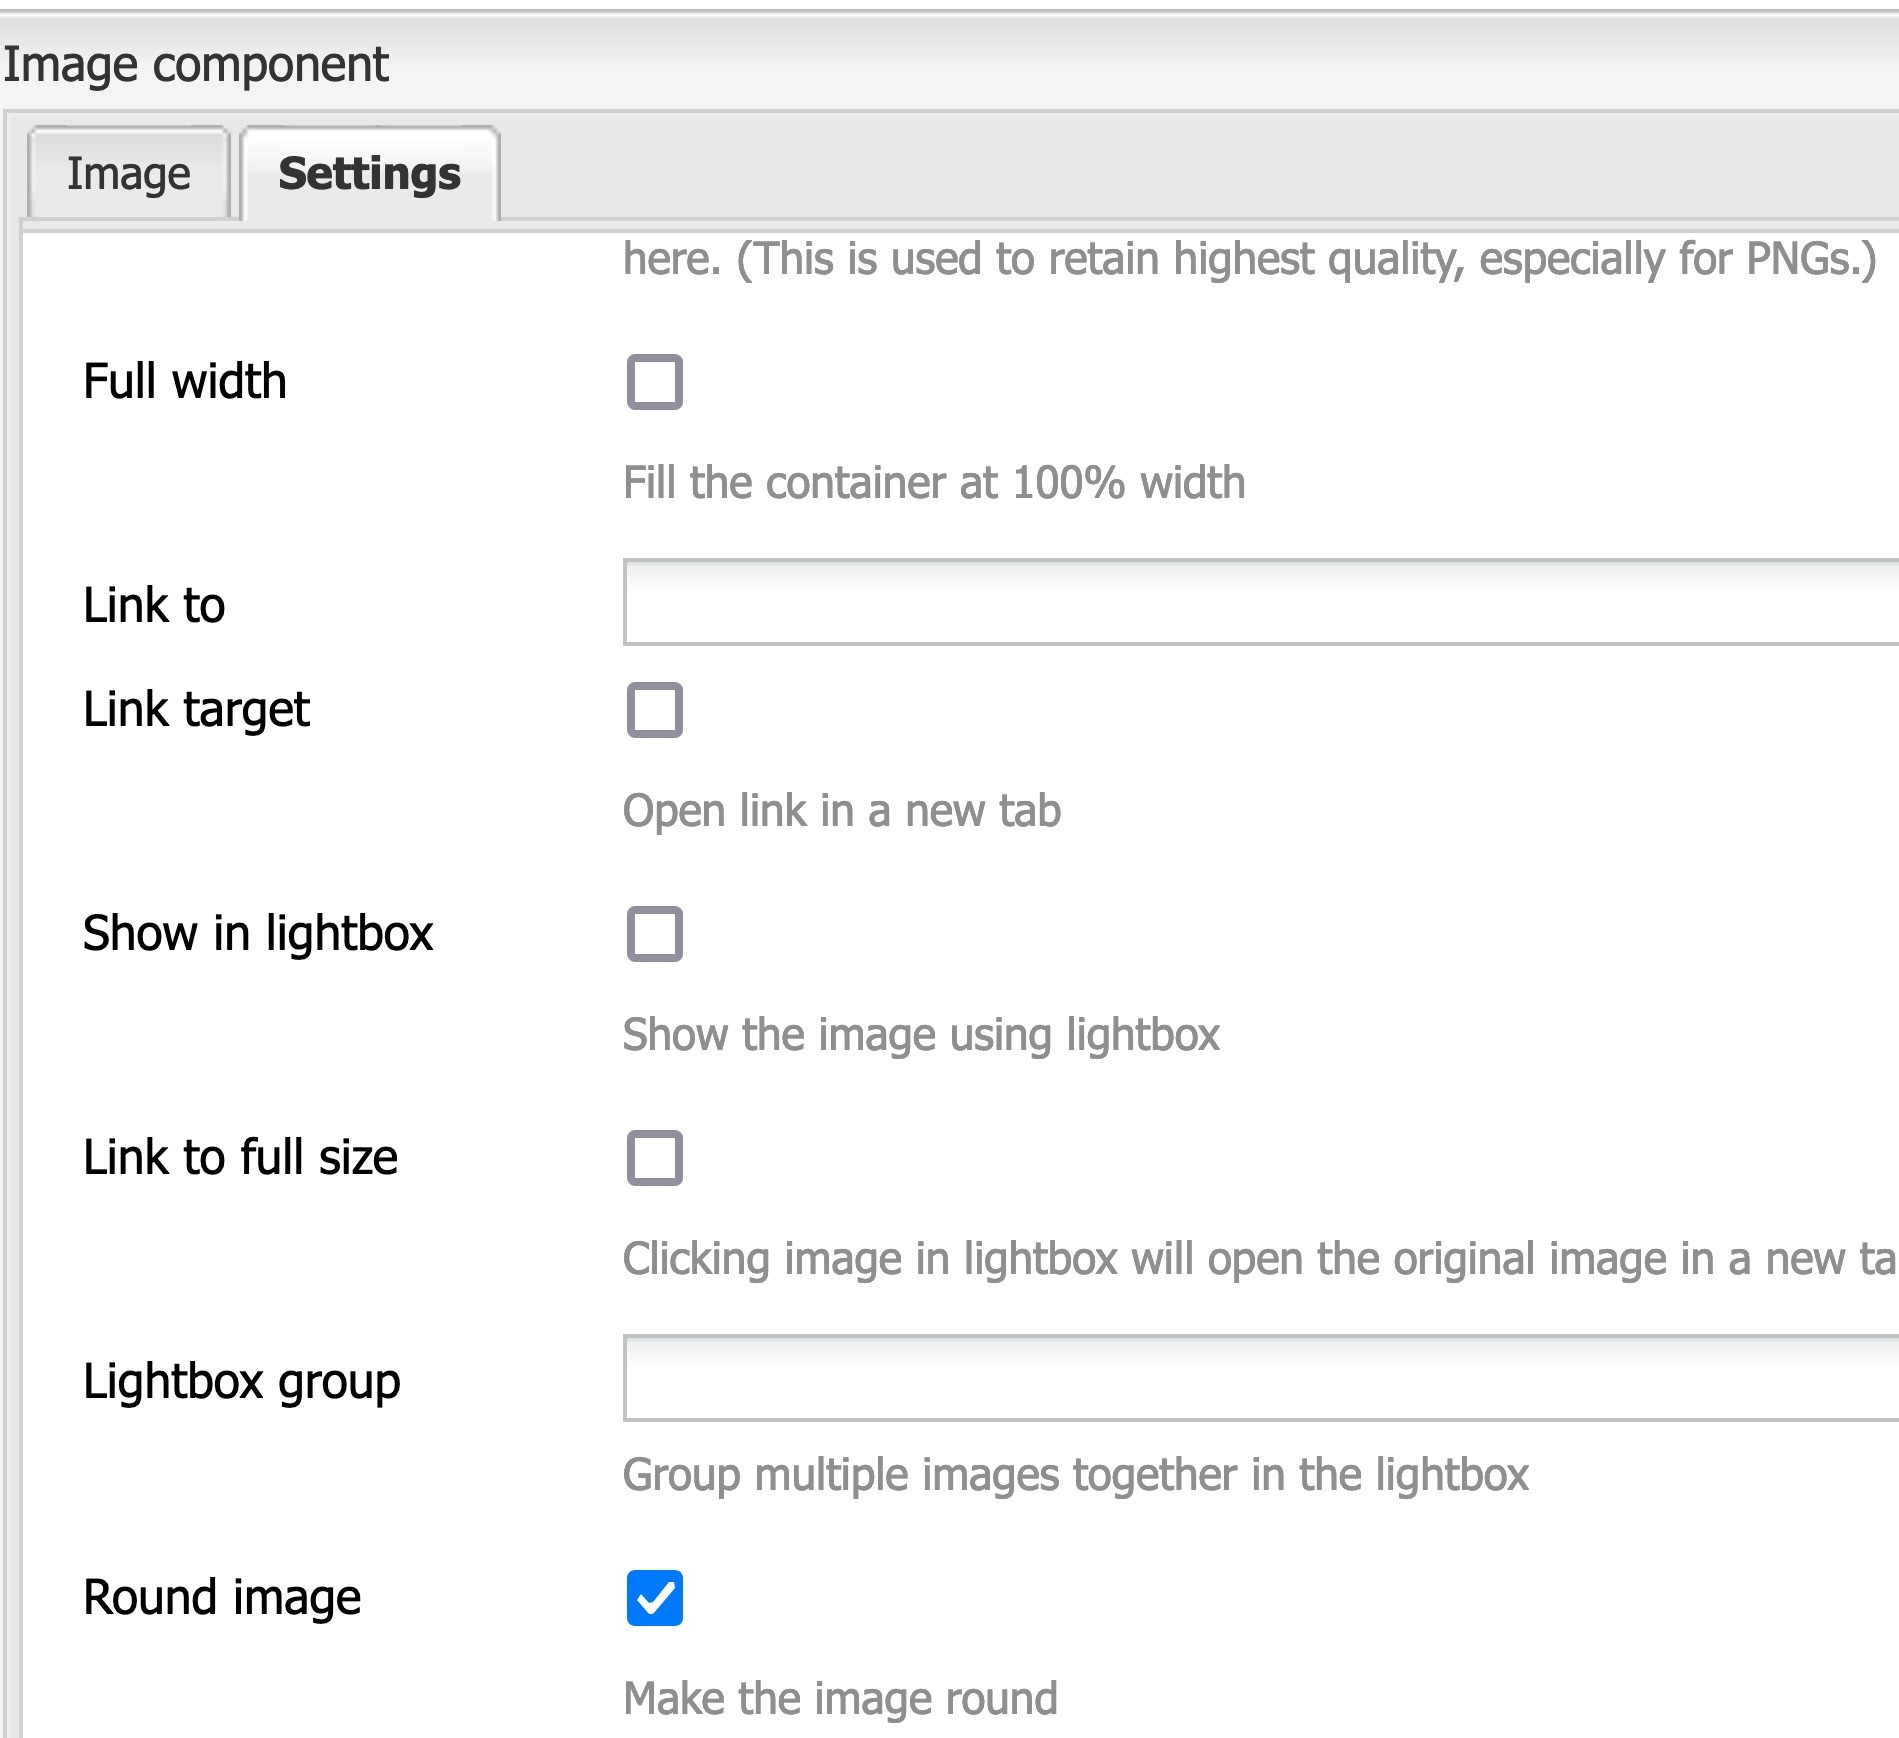 Screenshot of image component settings, with round image checkbox checked